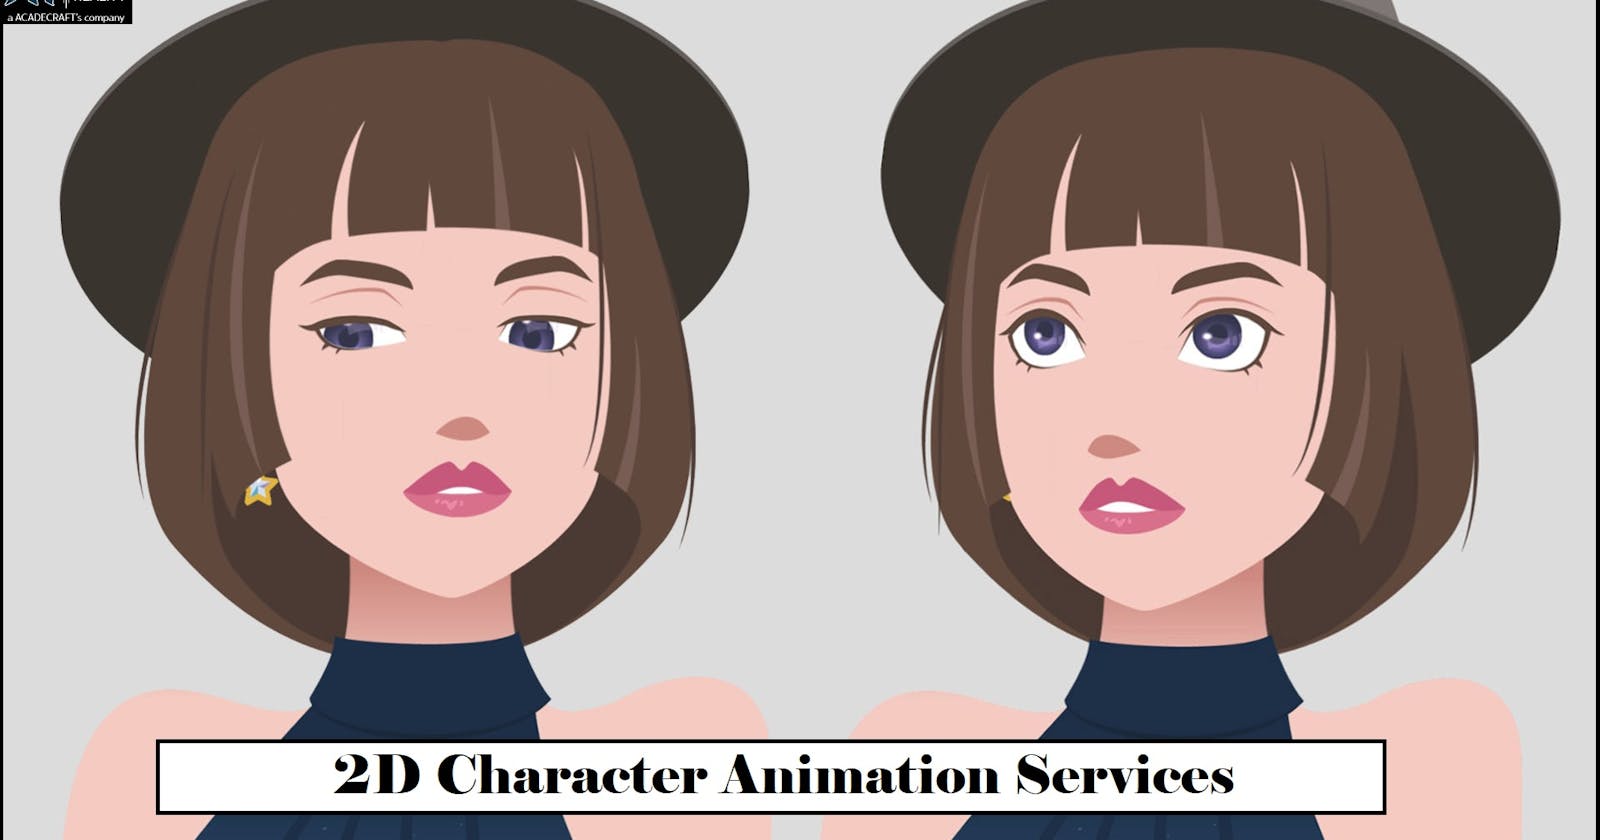 How does an unparalleled suite of 2D character designer services create stunning, eye-catching characters for any story or setting?